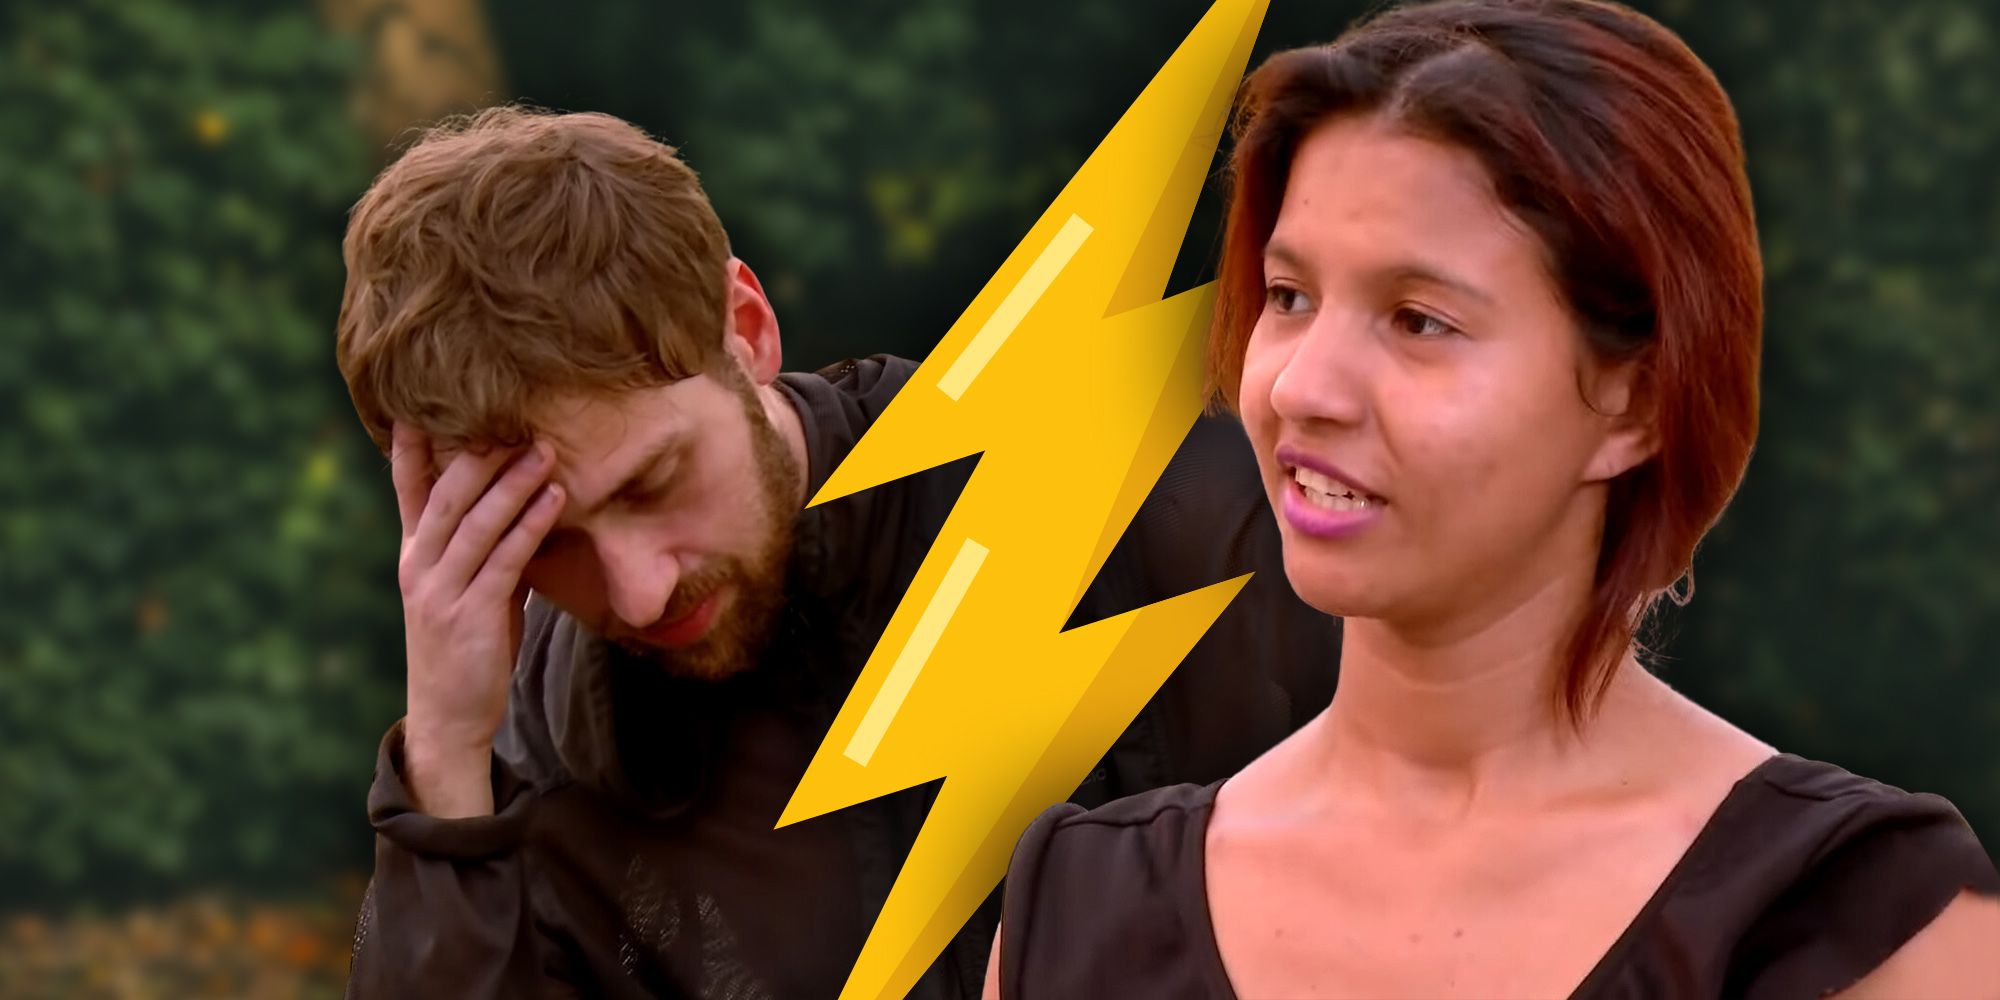 Karine and Paul from 90 day Fiancé with a bolt of lightening between them